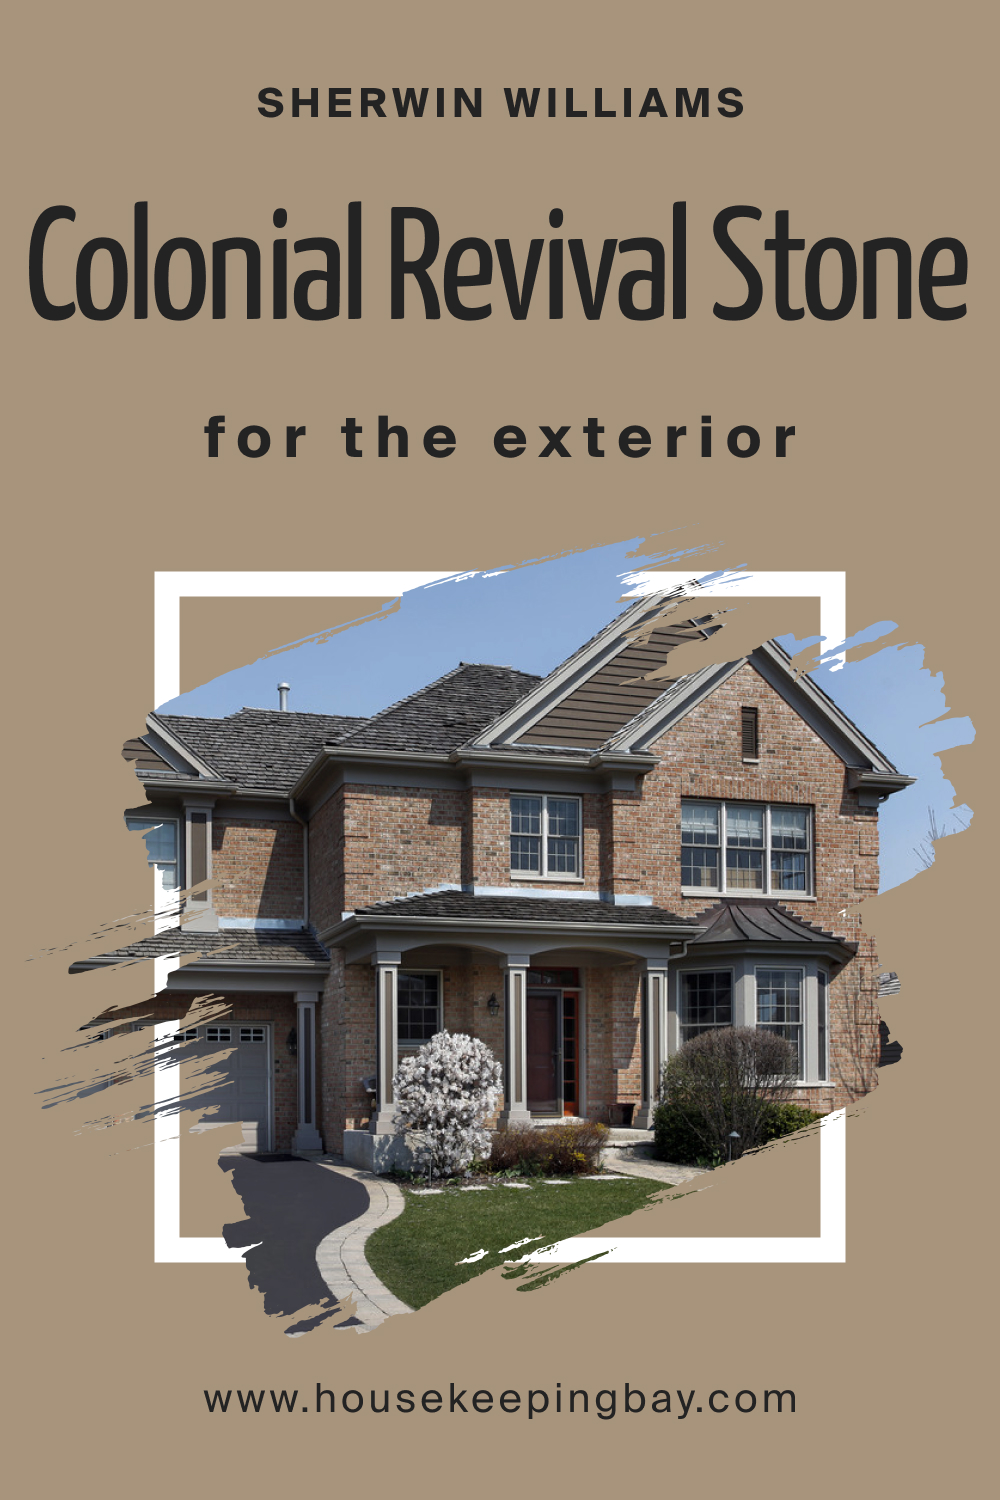 Sherwin Williams. SW 2827 Colonial Revival Stone For the exterior